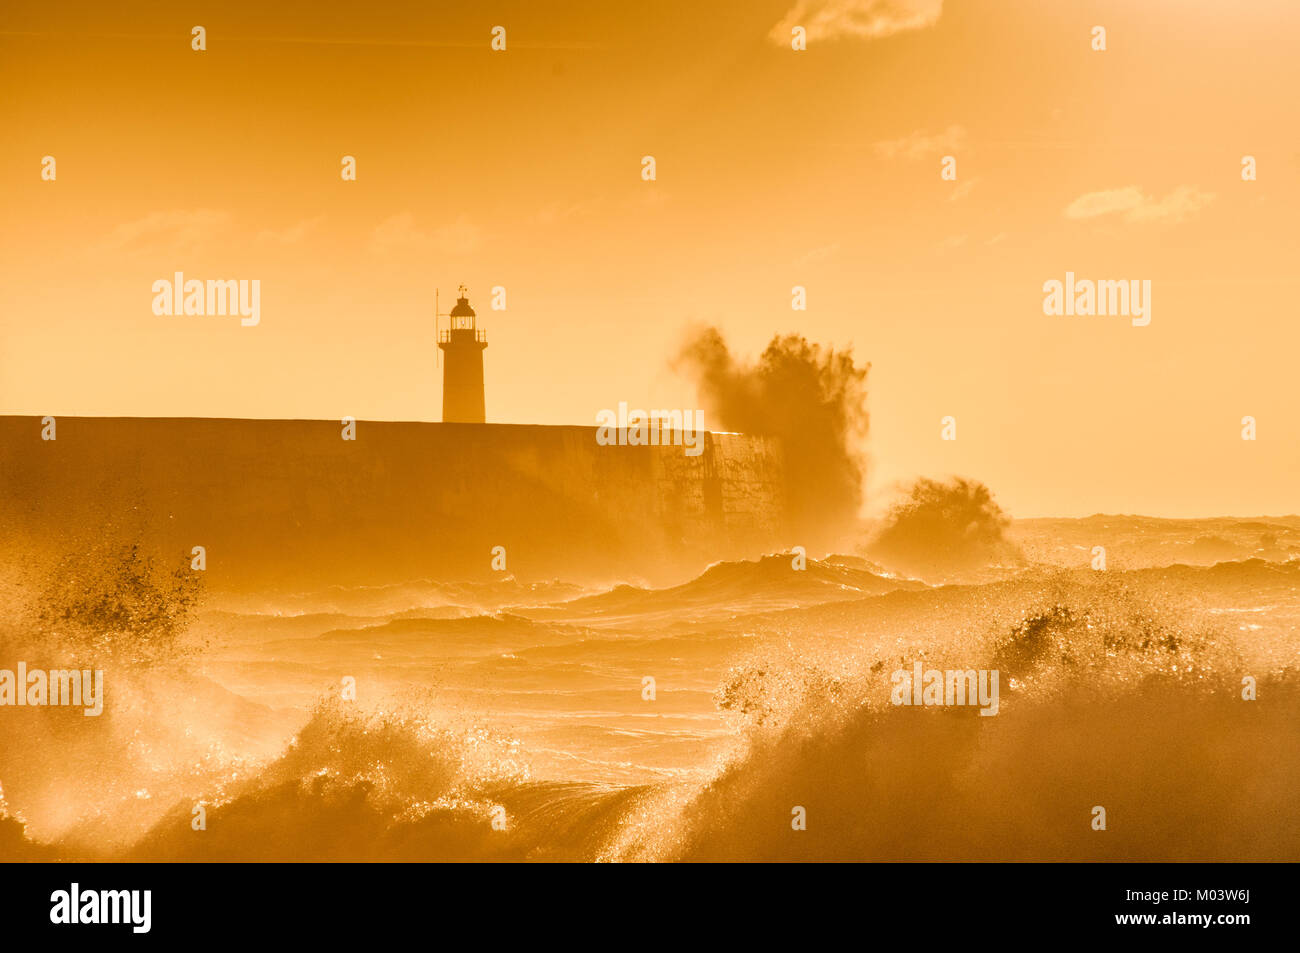 Newhaven, East Sussex. 18th Jan, 2018. UK Weather.A bright start to the day on the South Coast. Overnight gales subsiding leaving a brisk Westerly wind whipping up the surf backlit by the Orange glow of the rising Sun. . Stock Photo